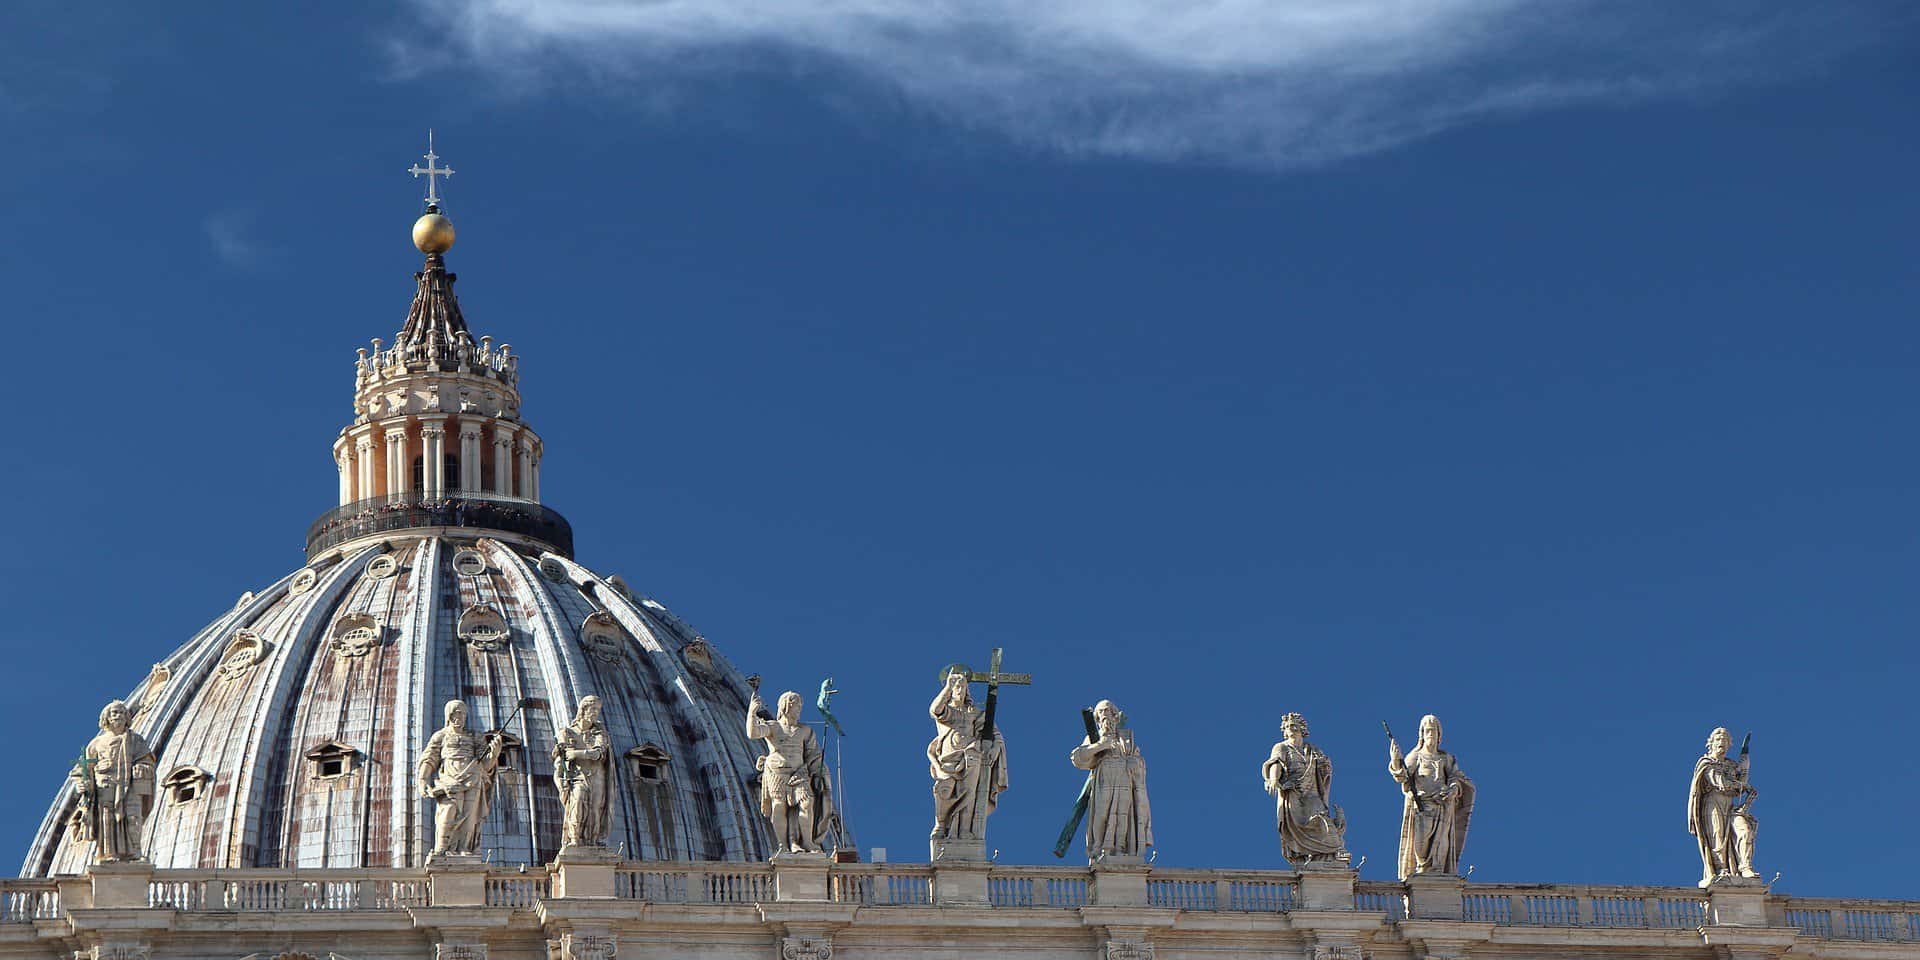 The top of the Vatican dome is seen very close up and to the left with the rooftop sculptures seen in front of it and to the right.